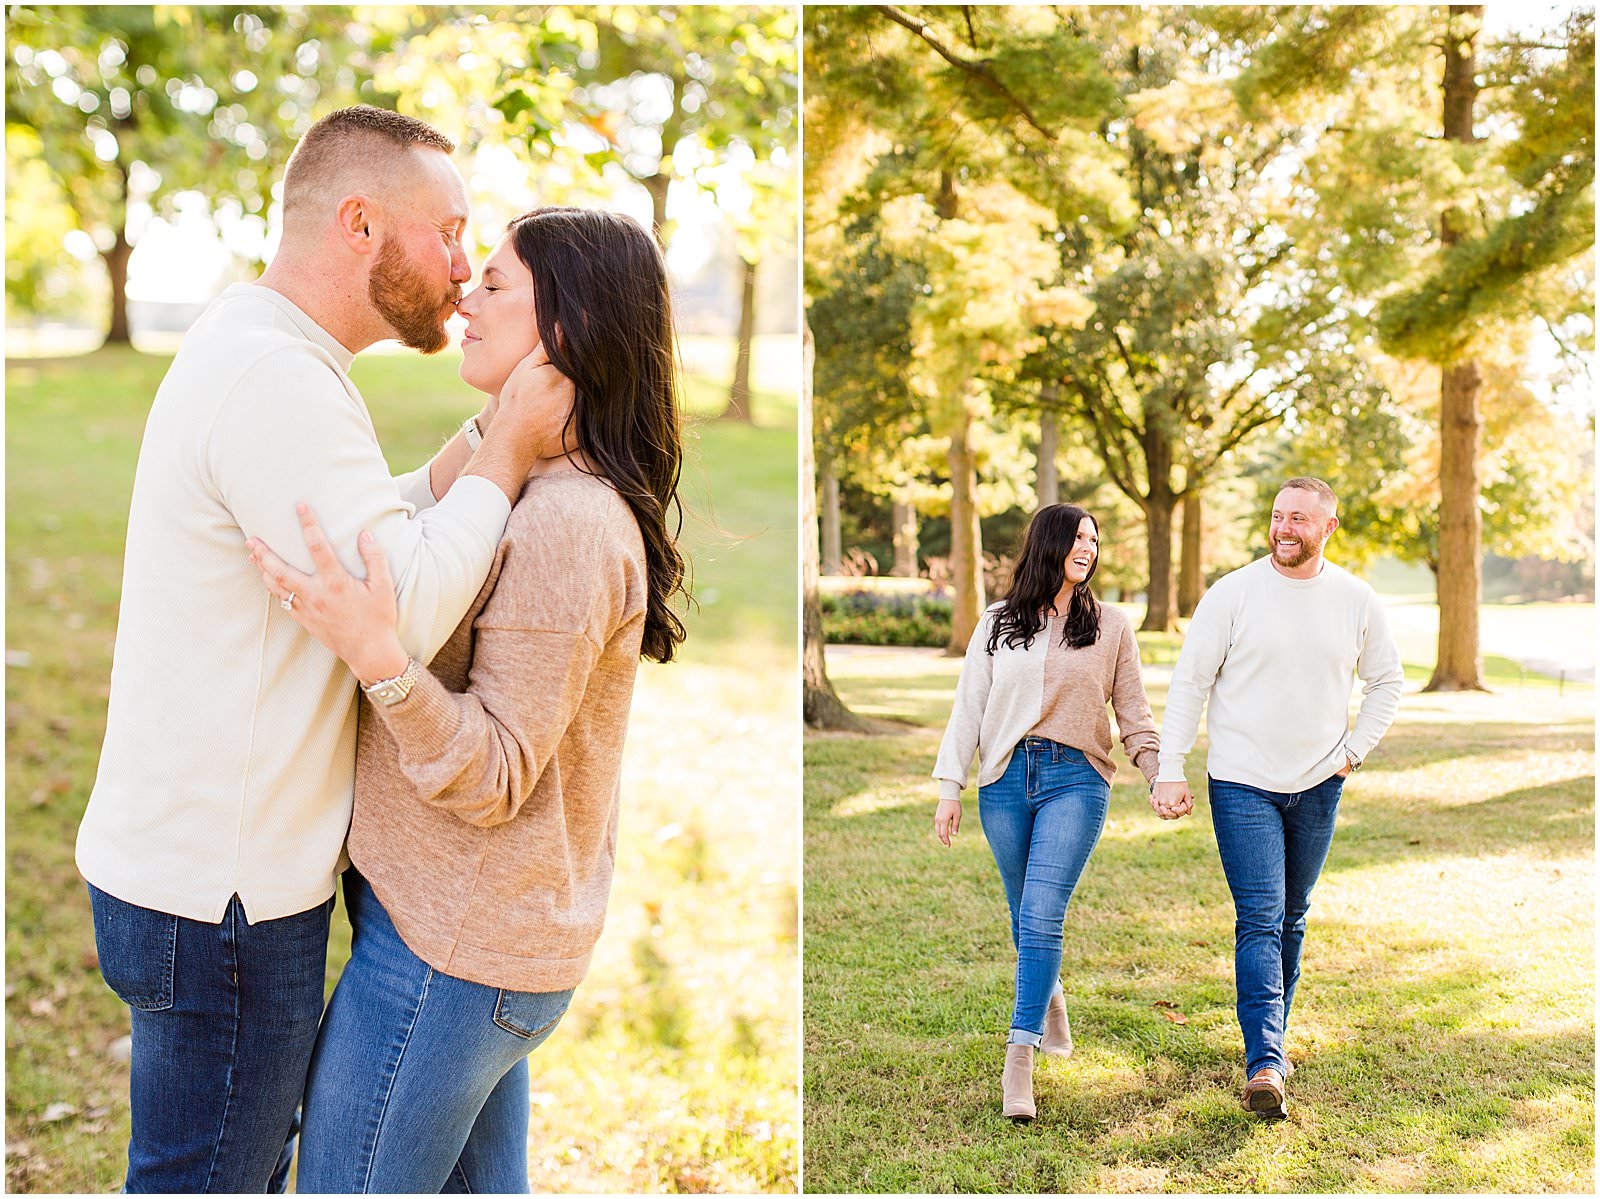 A Rolling Hills Country Club Engagement Session | Meagan and Kyle | Bret and Brandie Photography 0013.jpg